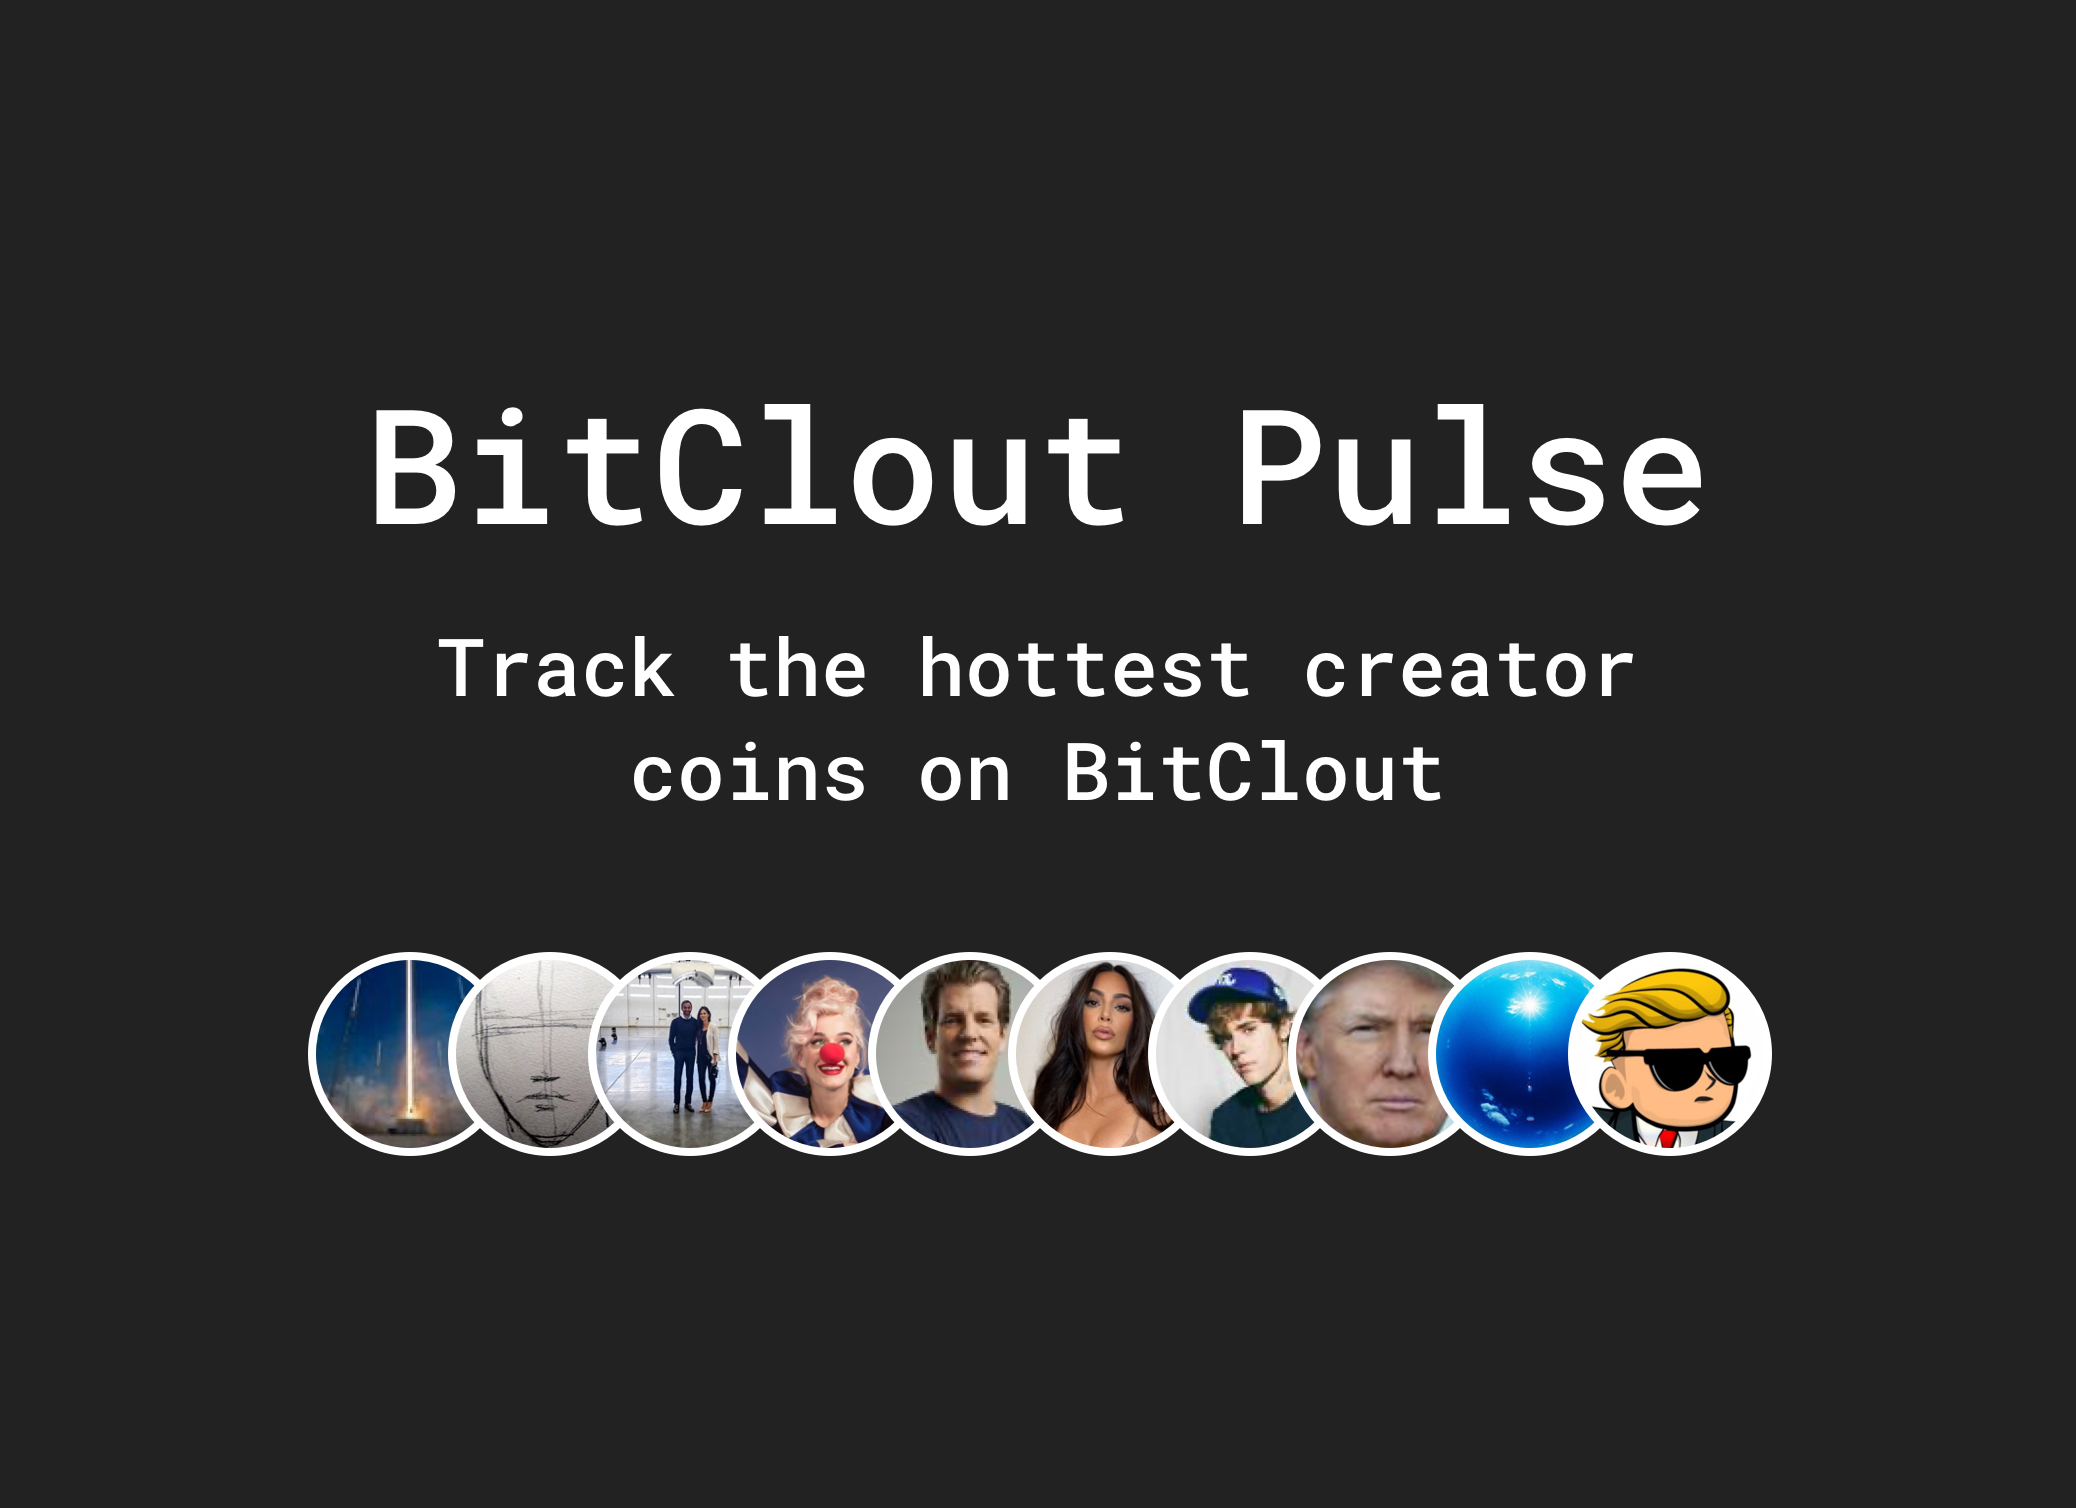 Challenging social media giants: BitClout’s rising clout